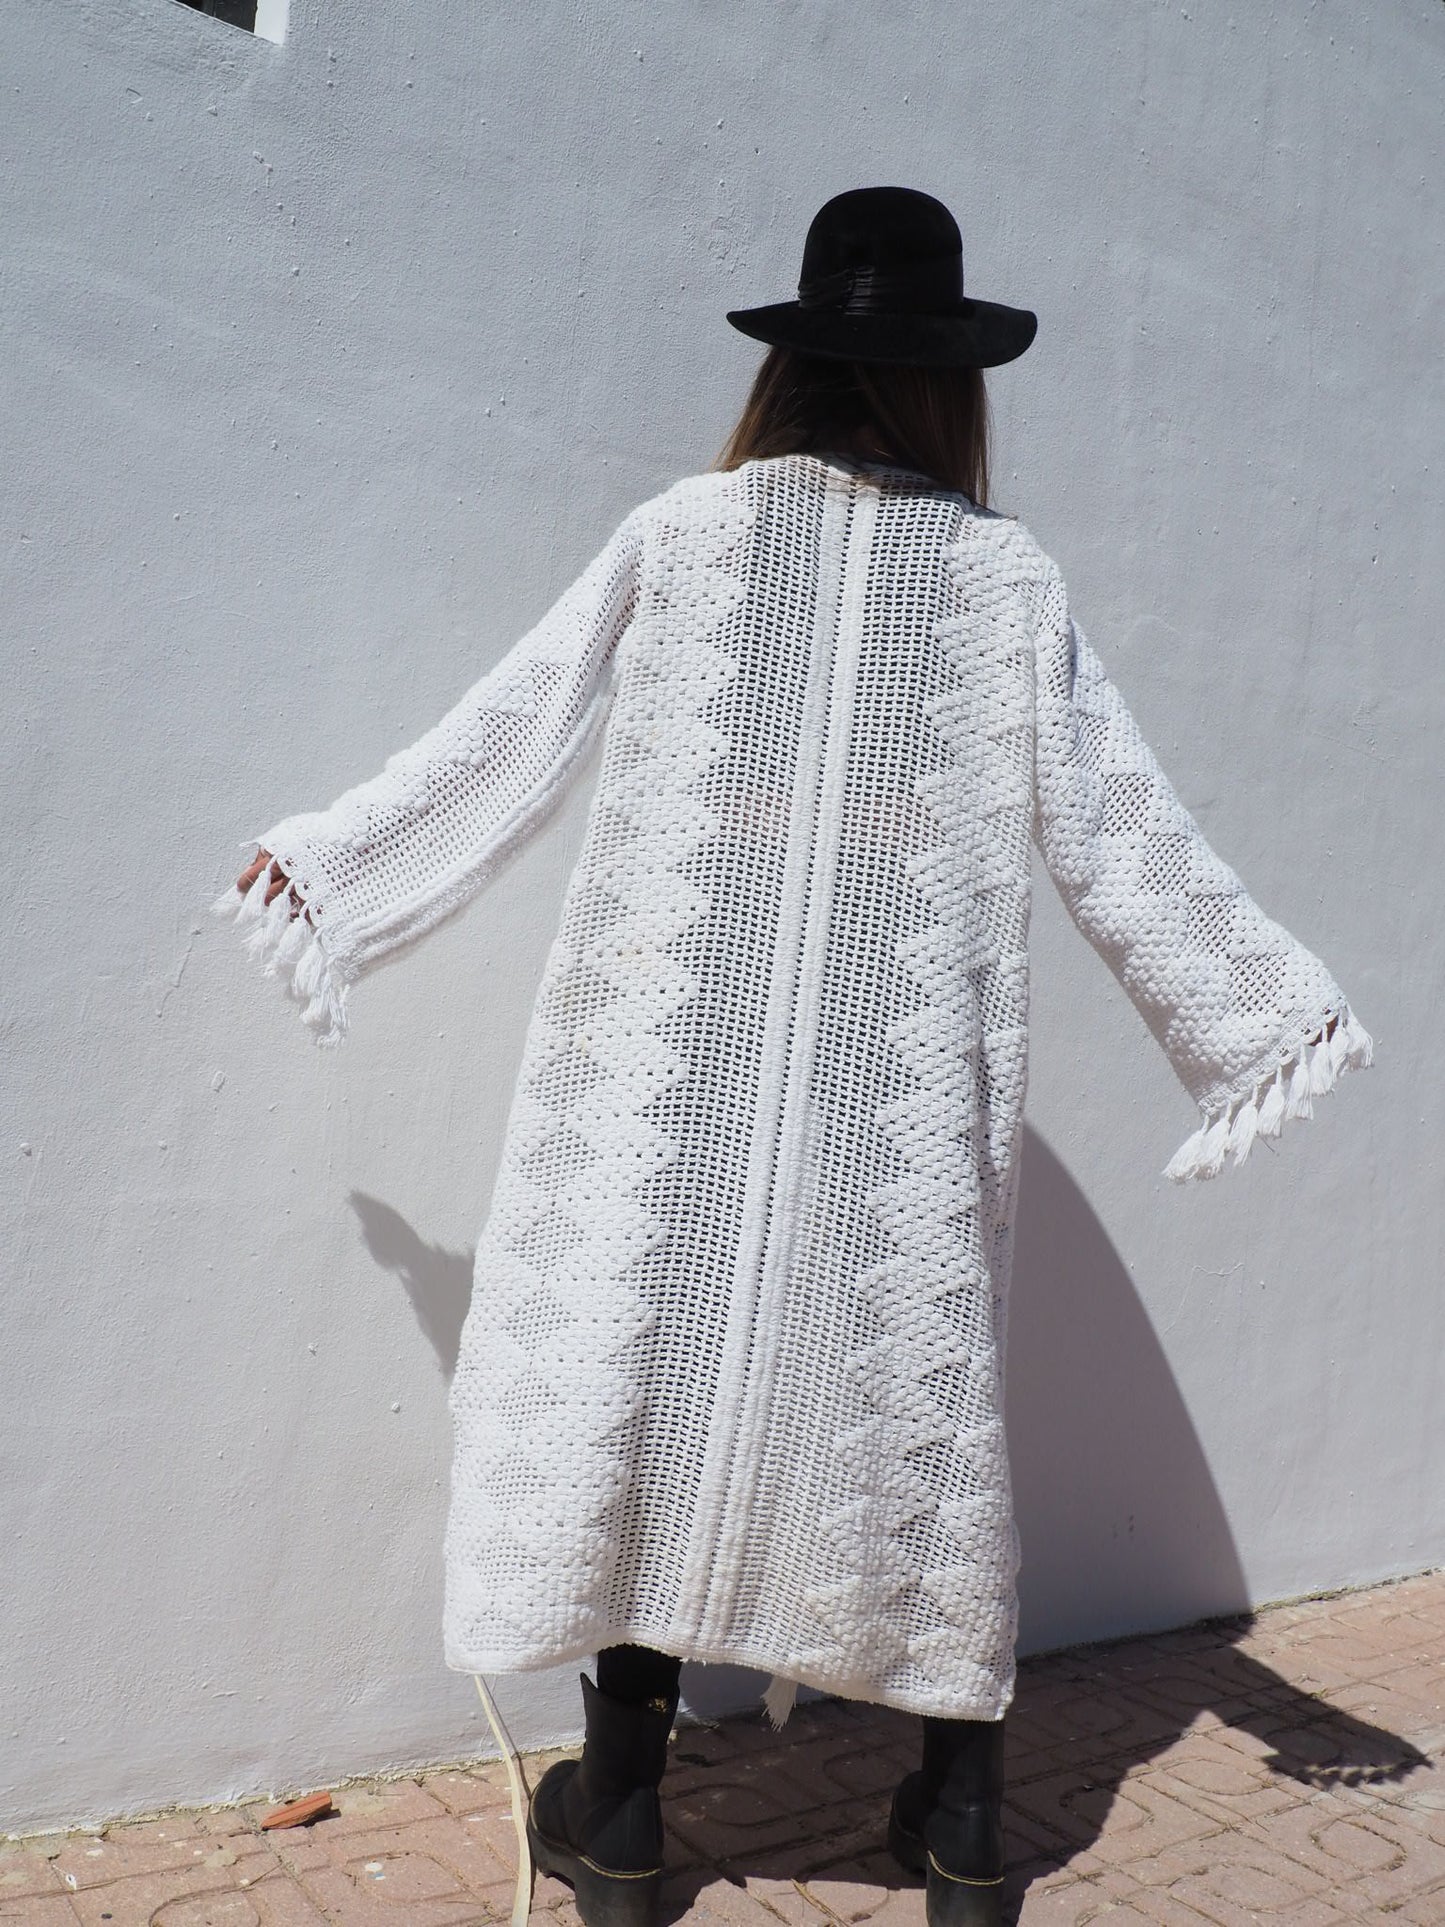 Unique on off a kind vintage white crochet jacket up-cycled by Vagabond Ibiza with cute tássel details.